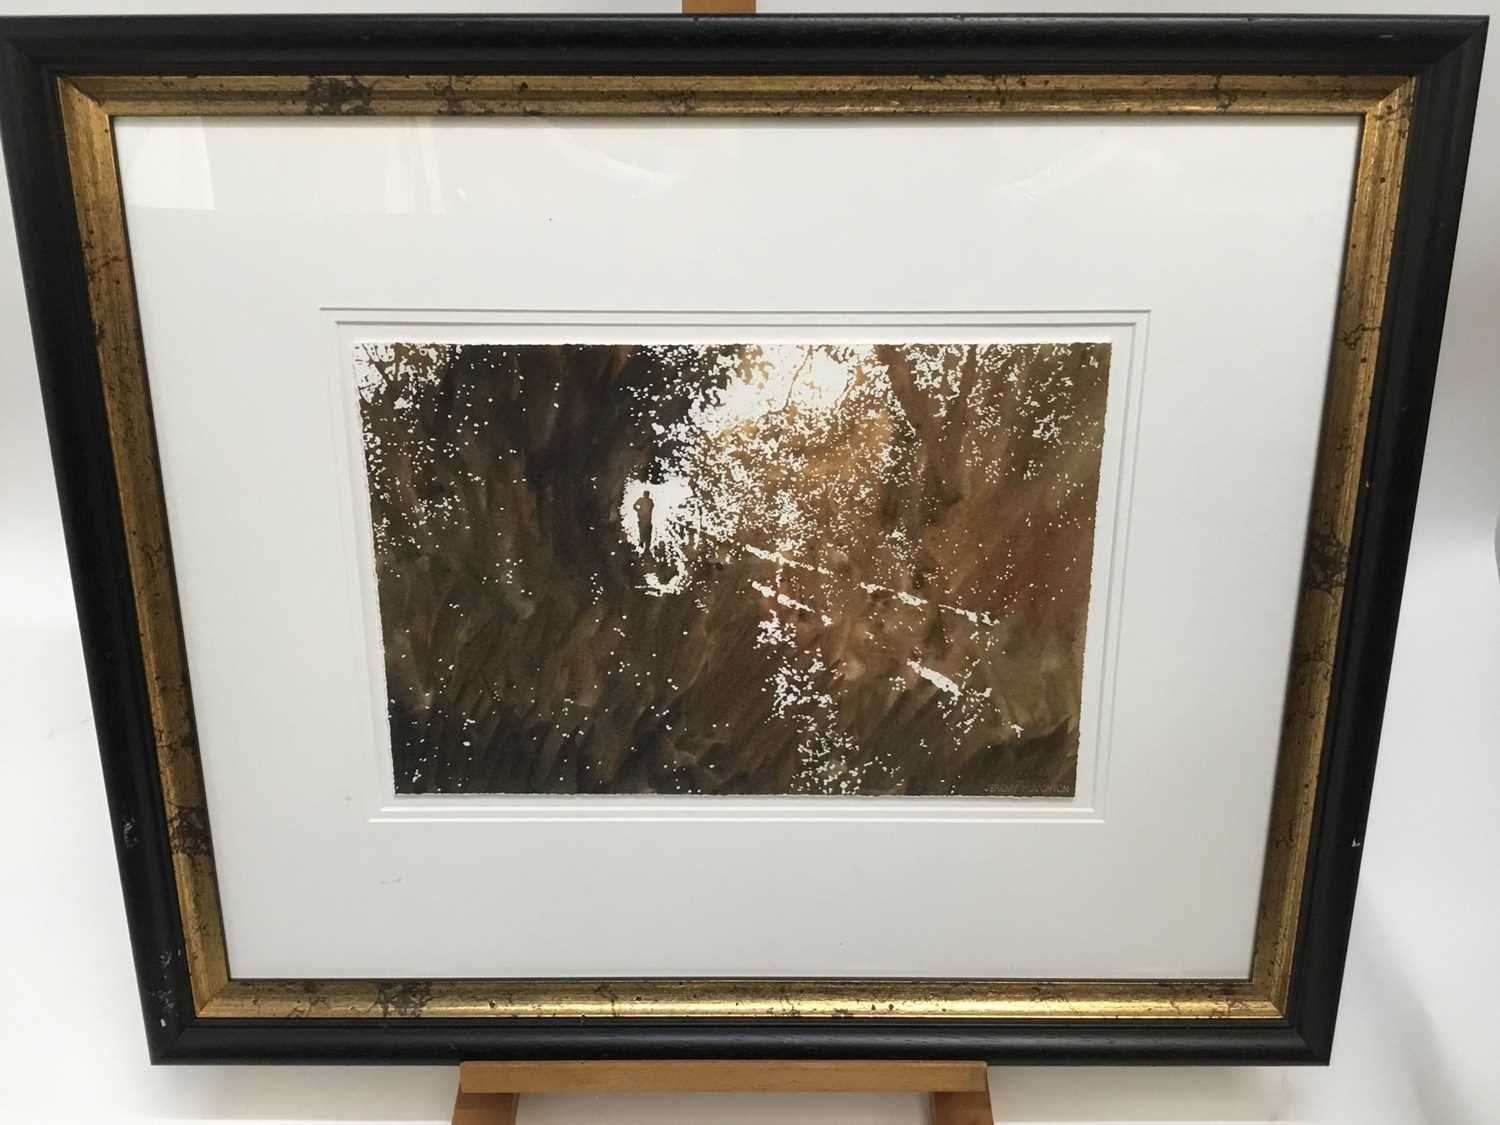 Lot 56 - Jeremy Houghton, contemporary, watercolour - figure in landscape, signed and dated '09, in glazed gilt and ebonised frame